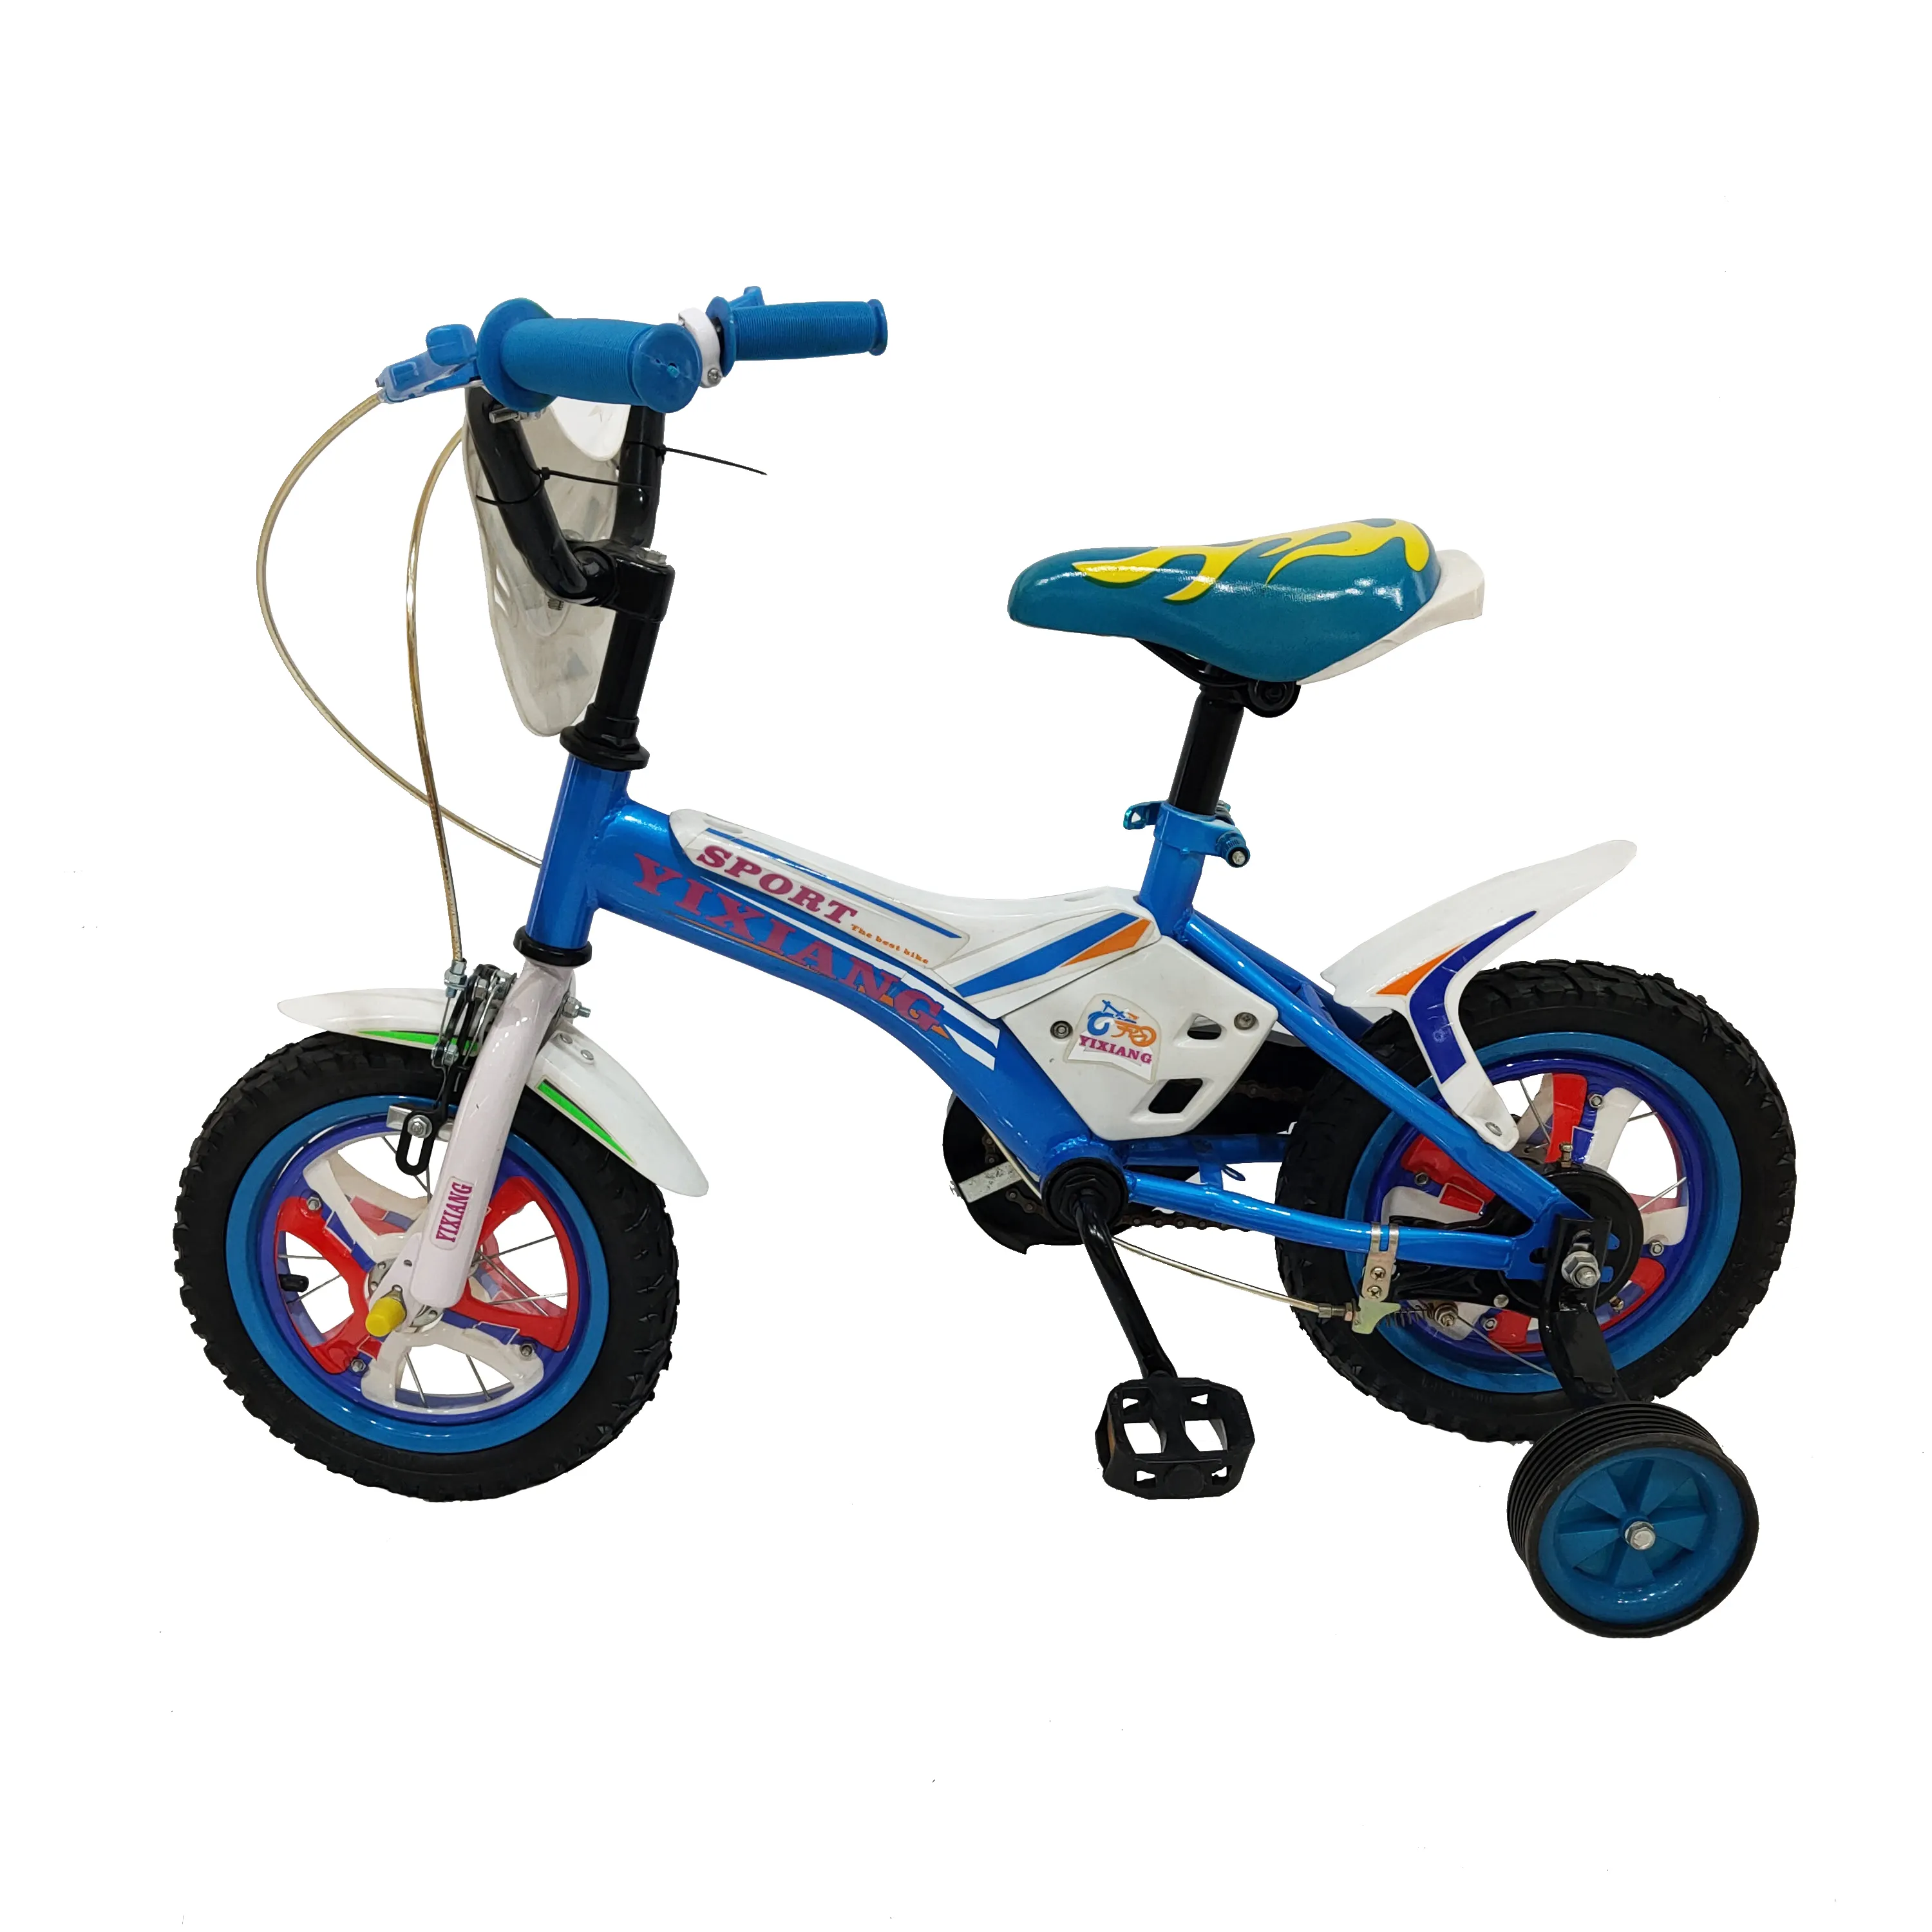 Hot factory wholesale popular and fashion cycle bike kids bicycle for 2-9 years old kids bike with training wheel